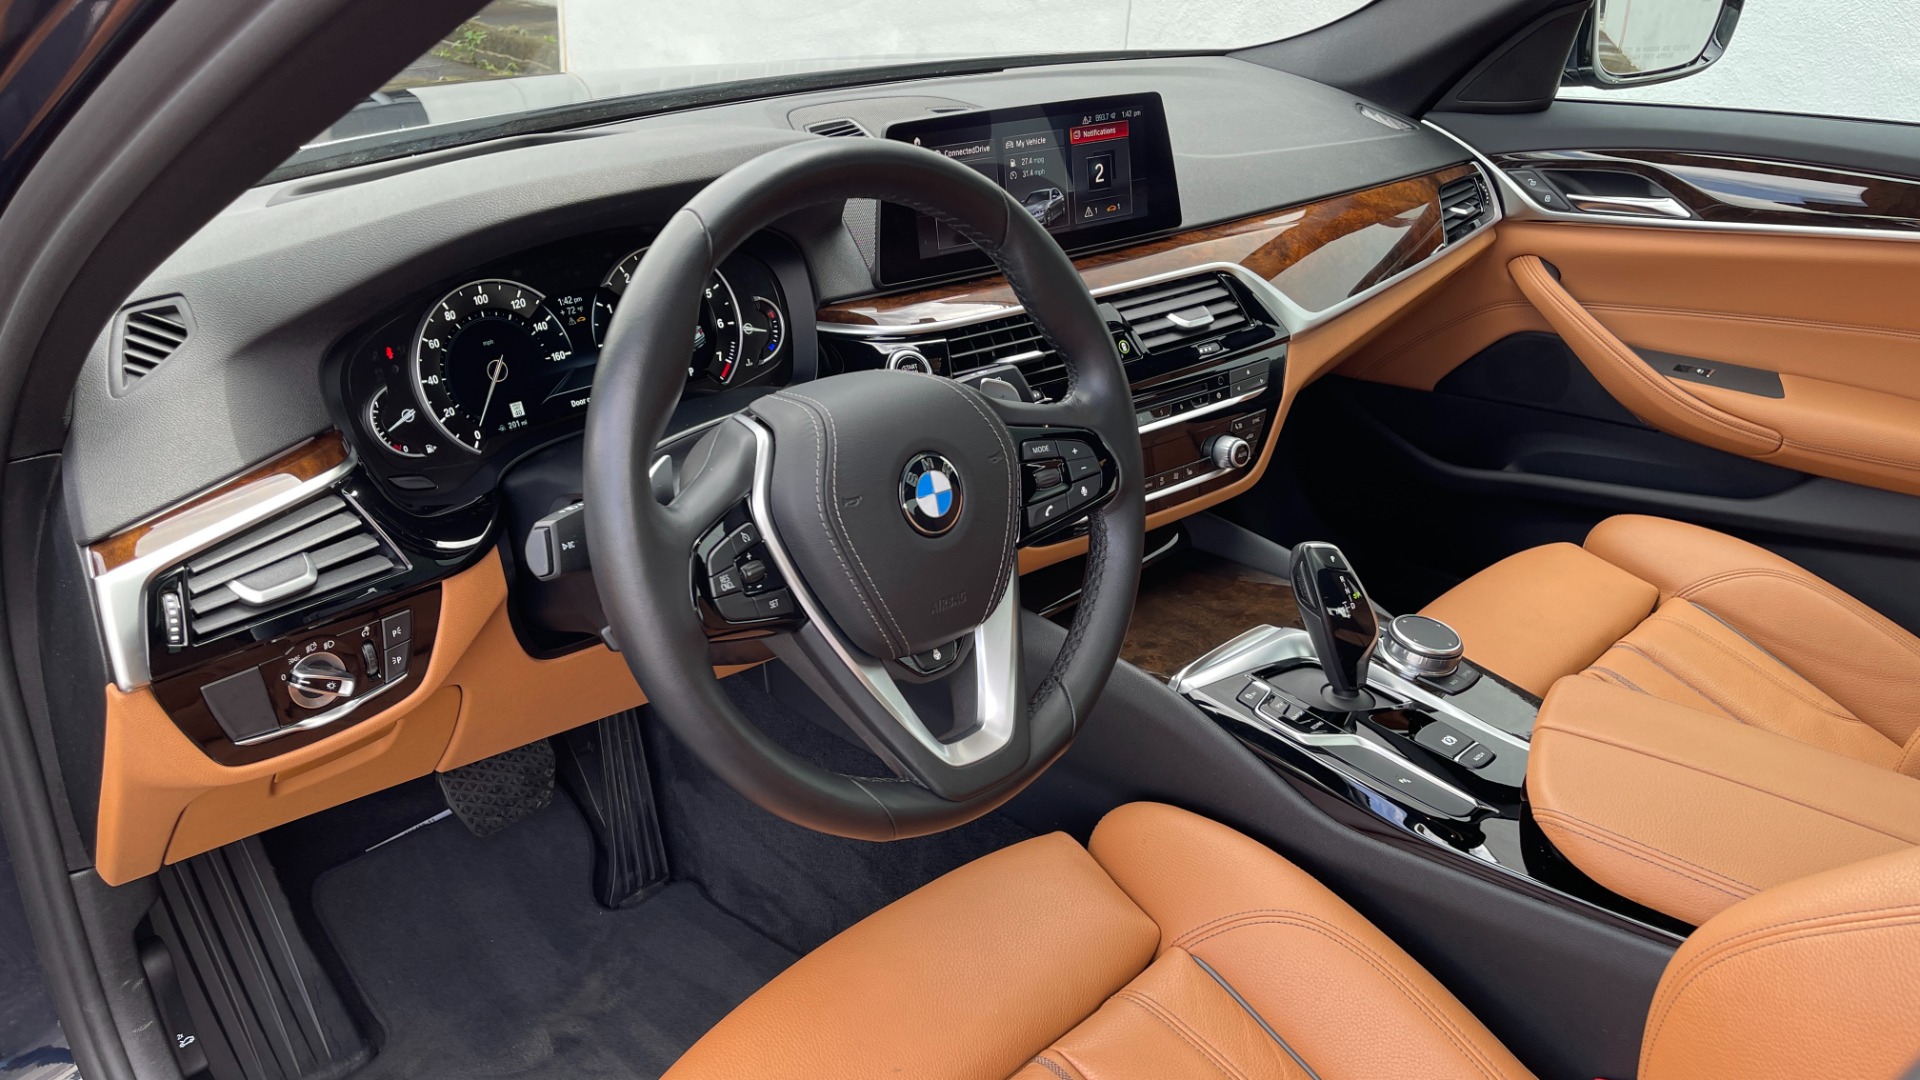 Used 2019 BMW 5 SERIES 530I XDRIVE / CONV PKG / NAV / HUD / HTD STS / SUNROOF / REARVIEW for sale Sold at Formula Imports in Charlotte NC 28227 28